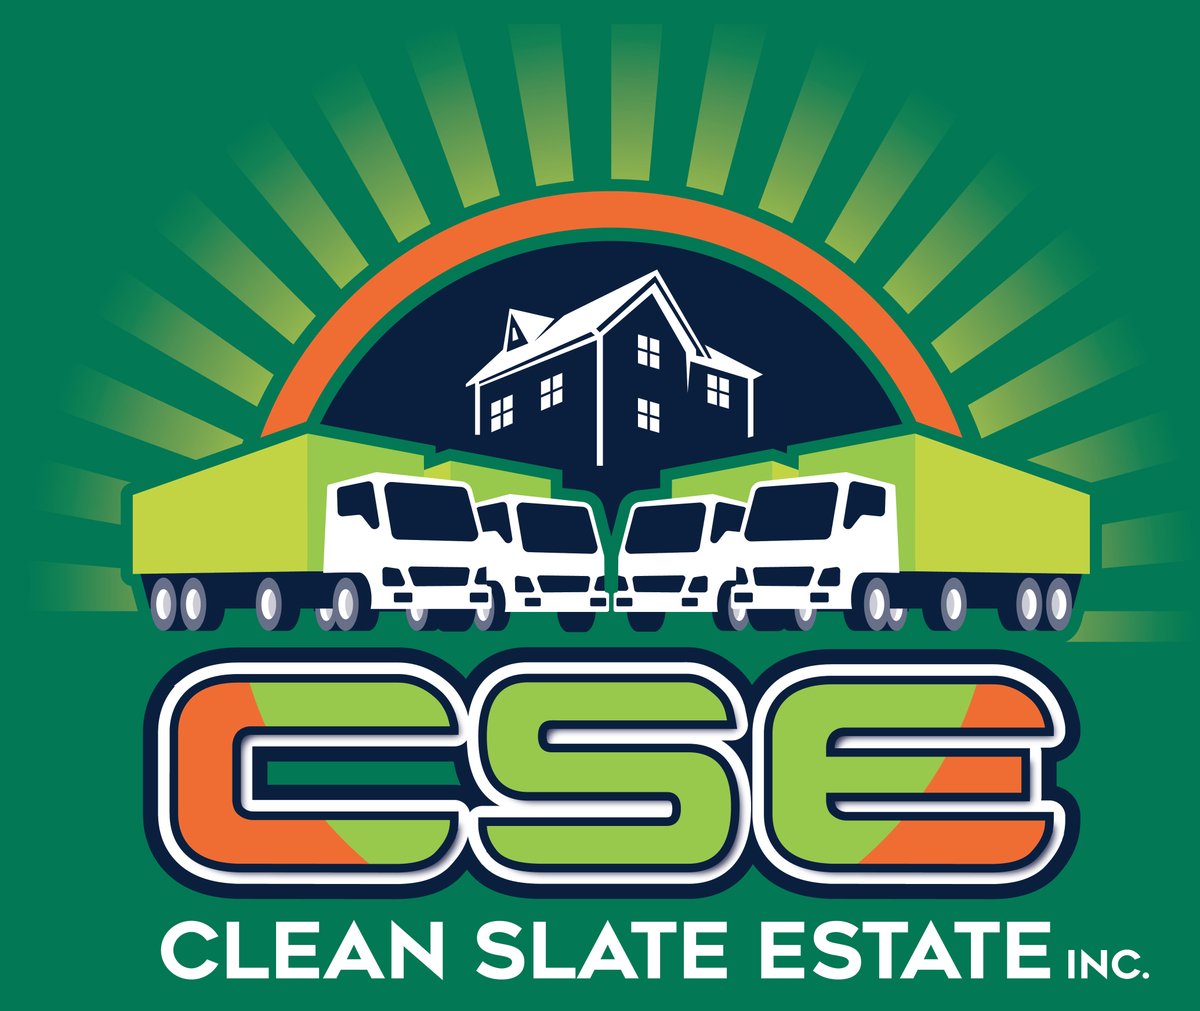 We are New England's premier estate cleanout company!!. call us now!!!
401-640-9385

#estatecleanout
#barncleanout
#garagecleanout
#atticcleanout
#basementcleanout
#estatesale
#estateprobate
#probateattorney
#estateattorney
#moving